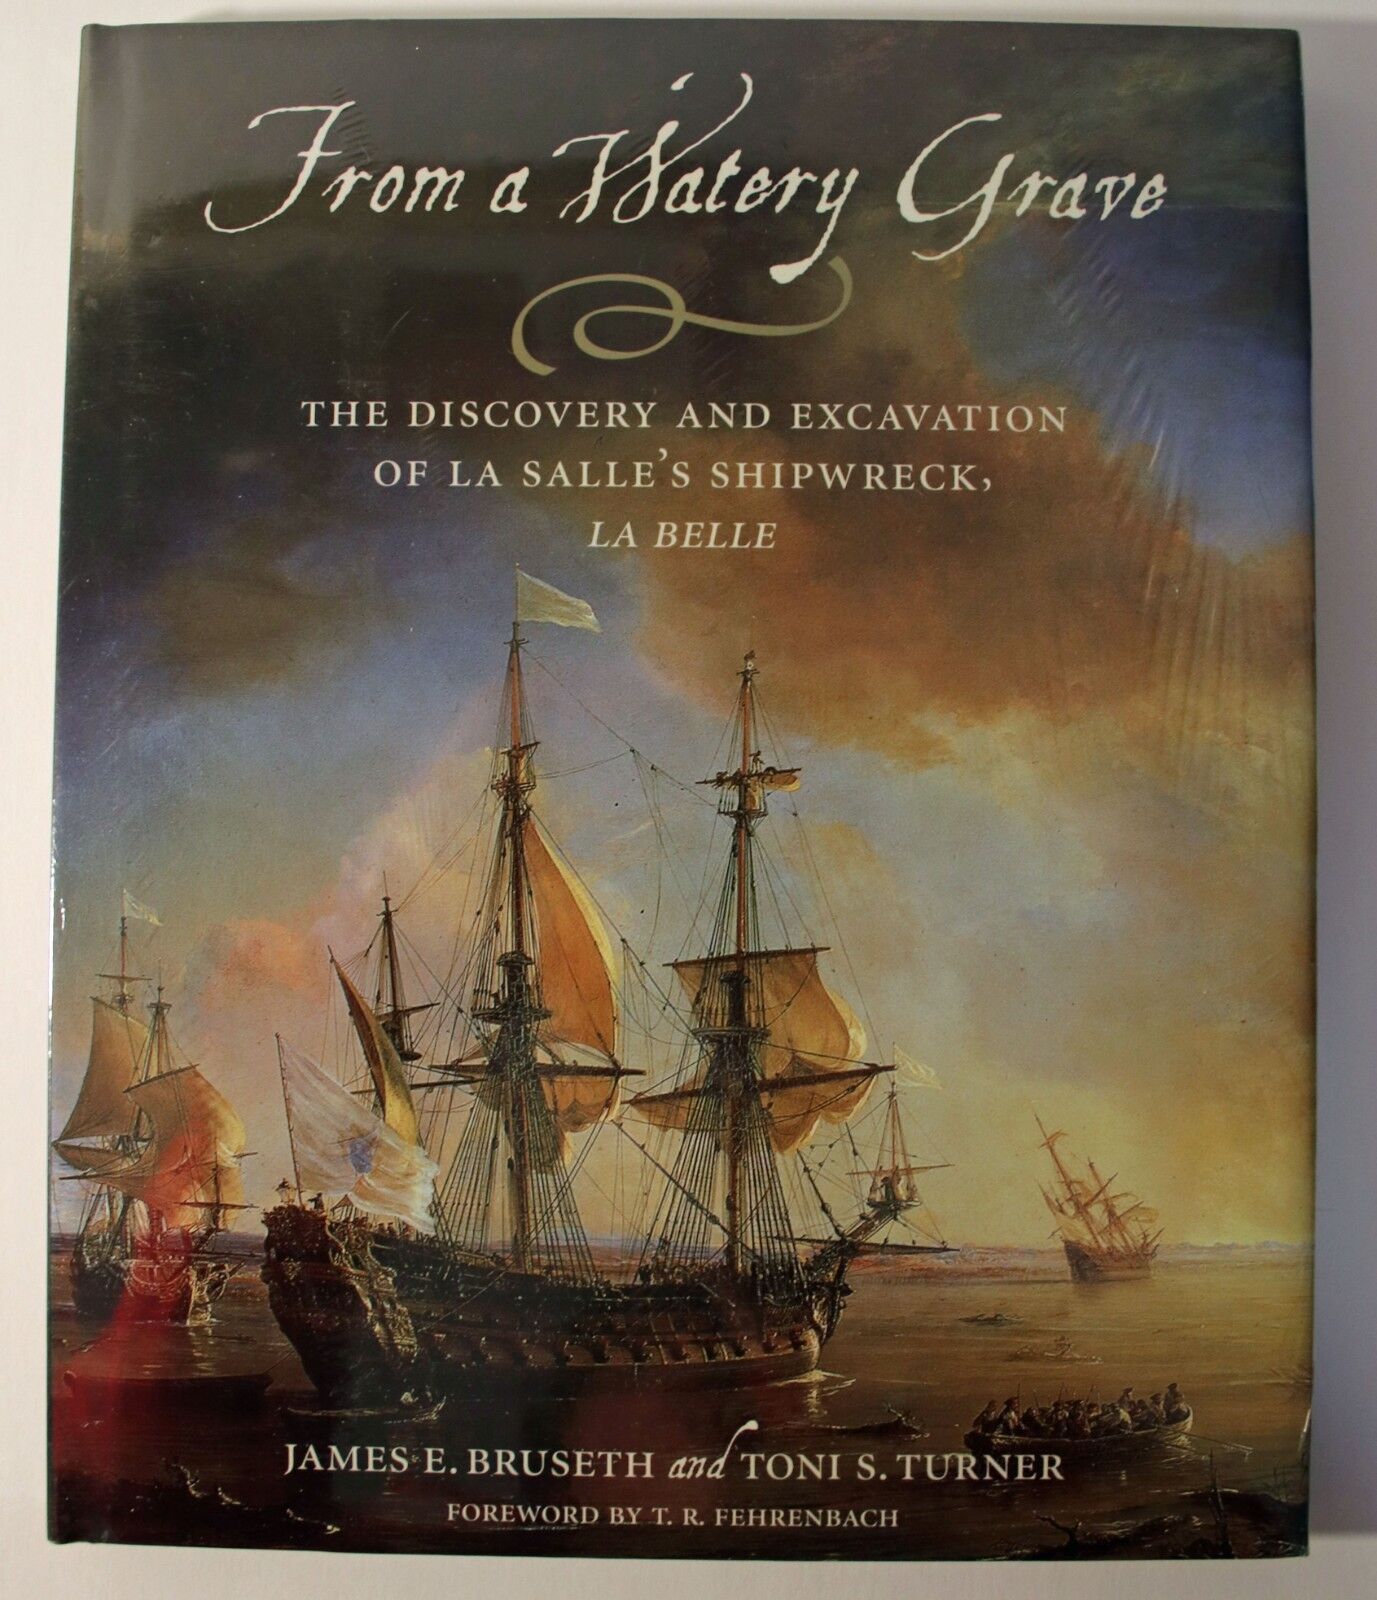 From a Watery Grave : The Disc & Excavation of La Salle's Shipwreck, La Belle HC